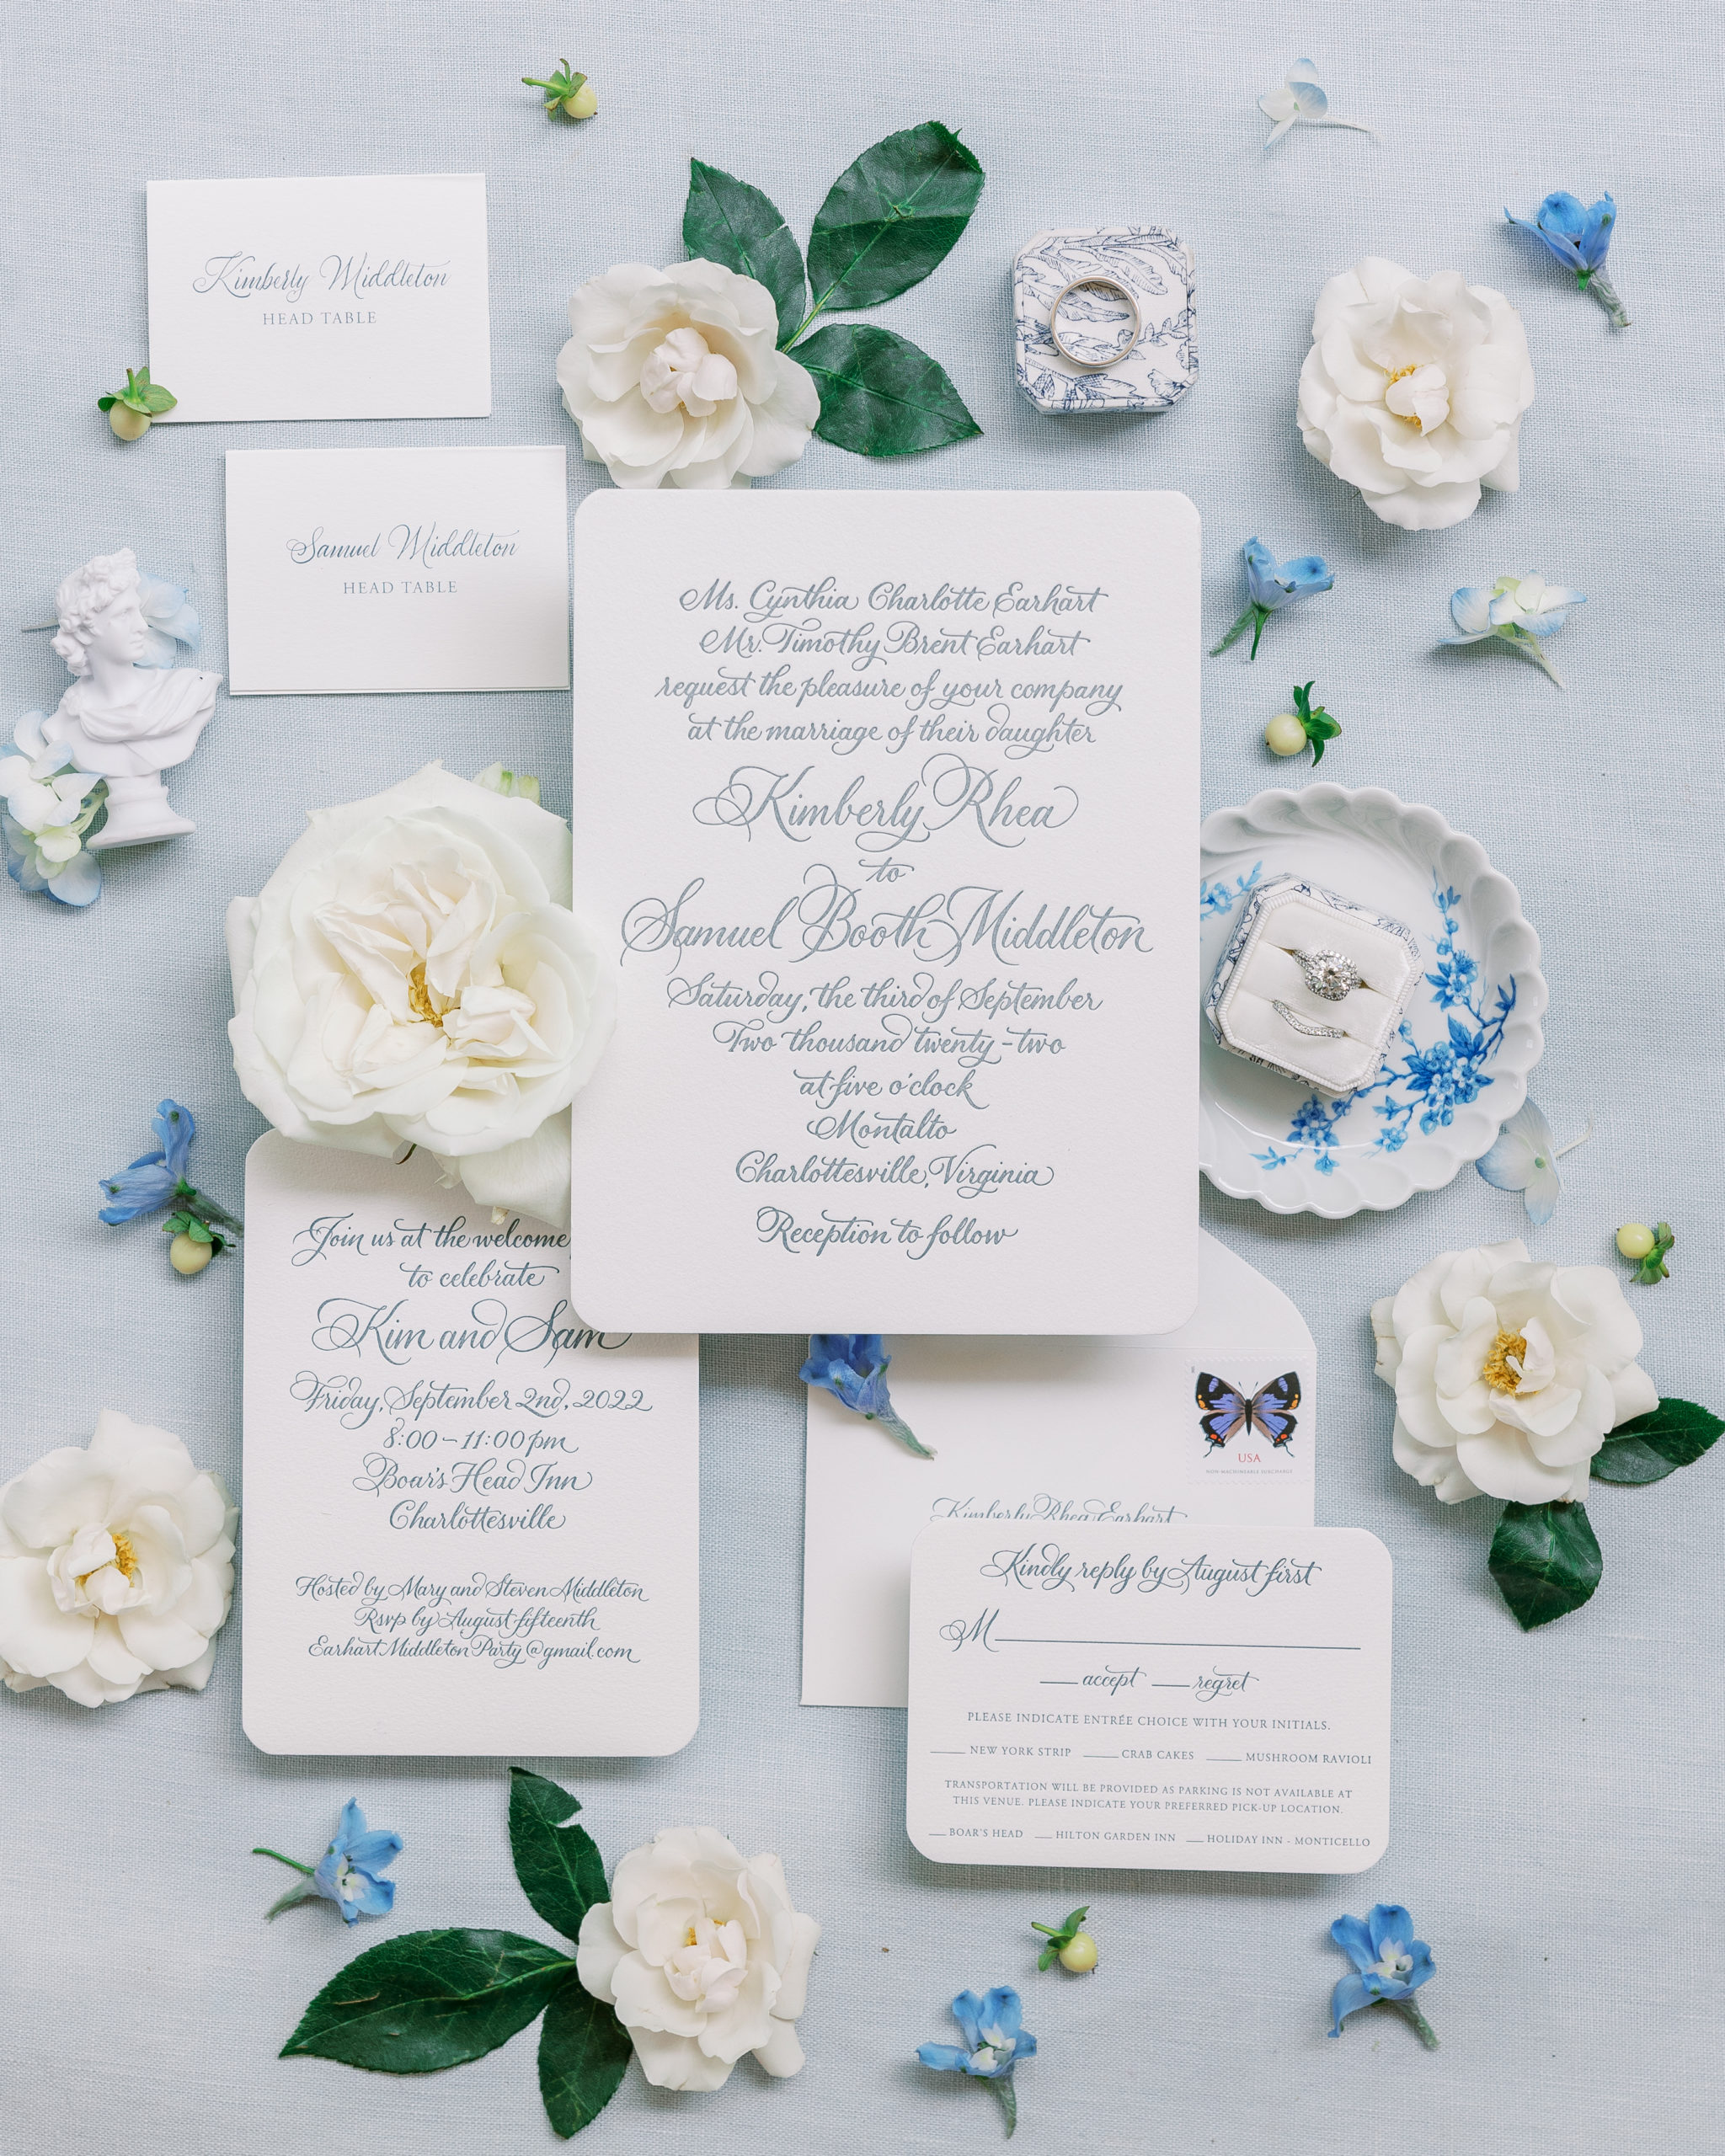 Cream and blue invitation suite with rings and white and blue flowers for Charlottesville Wedding Photography
